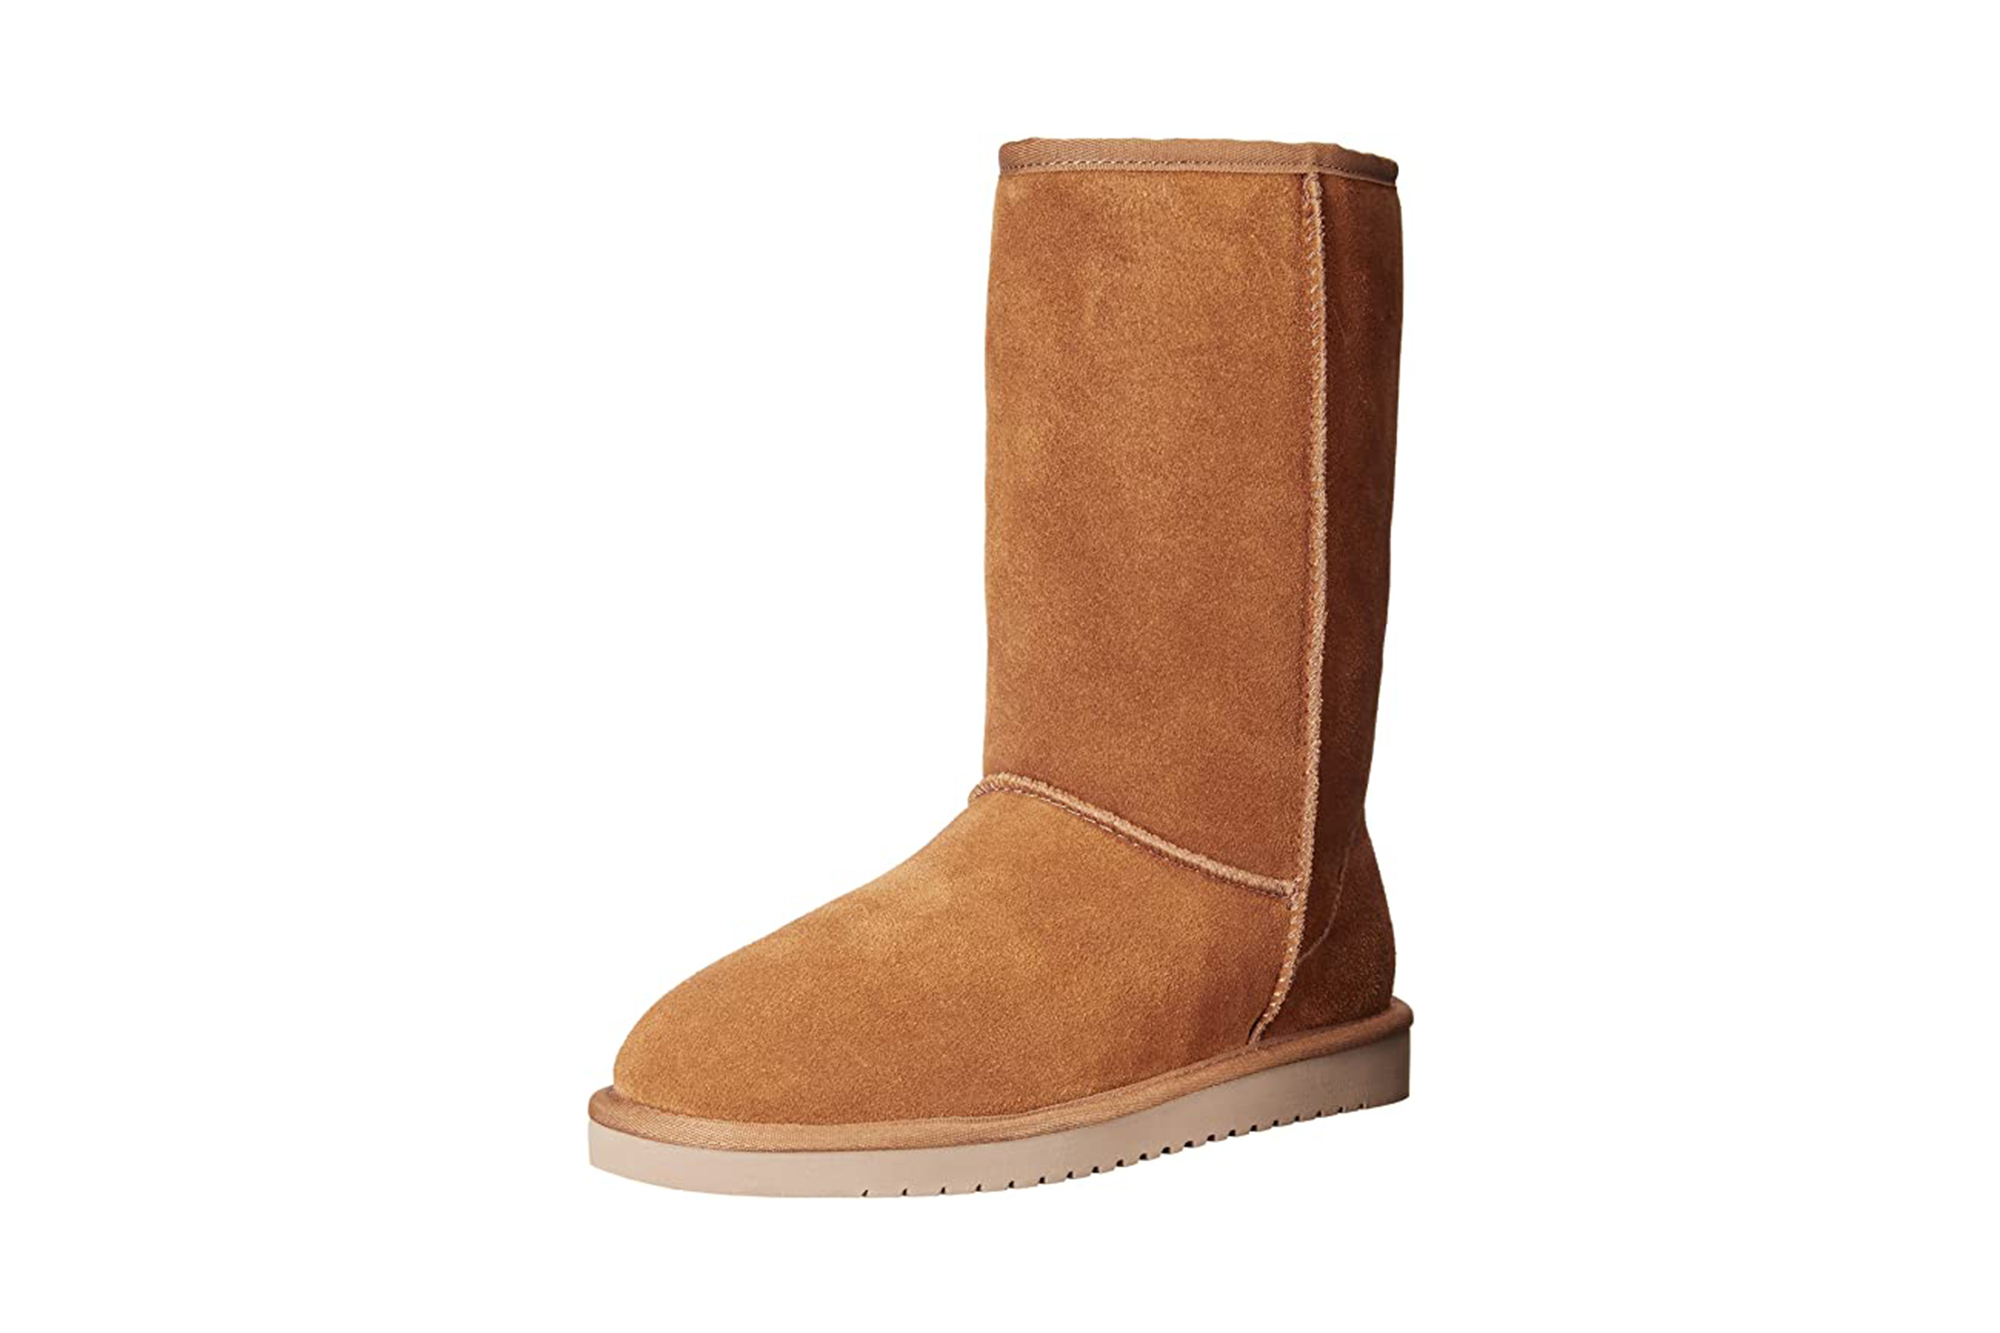 Sjah navigatie draadloos Save $100 on Uggs With These Koolaburra by Ugg Tall Boots